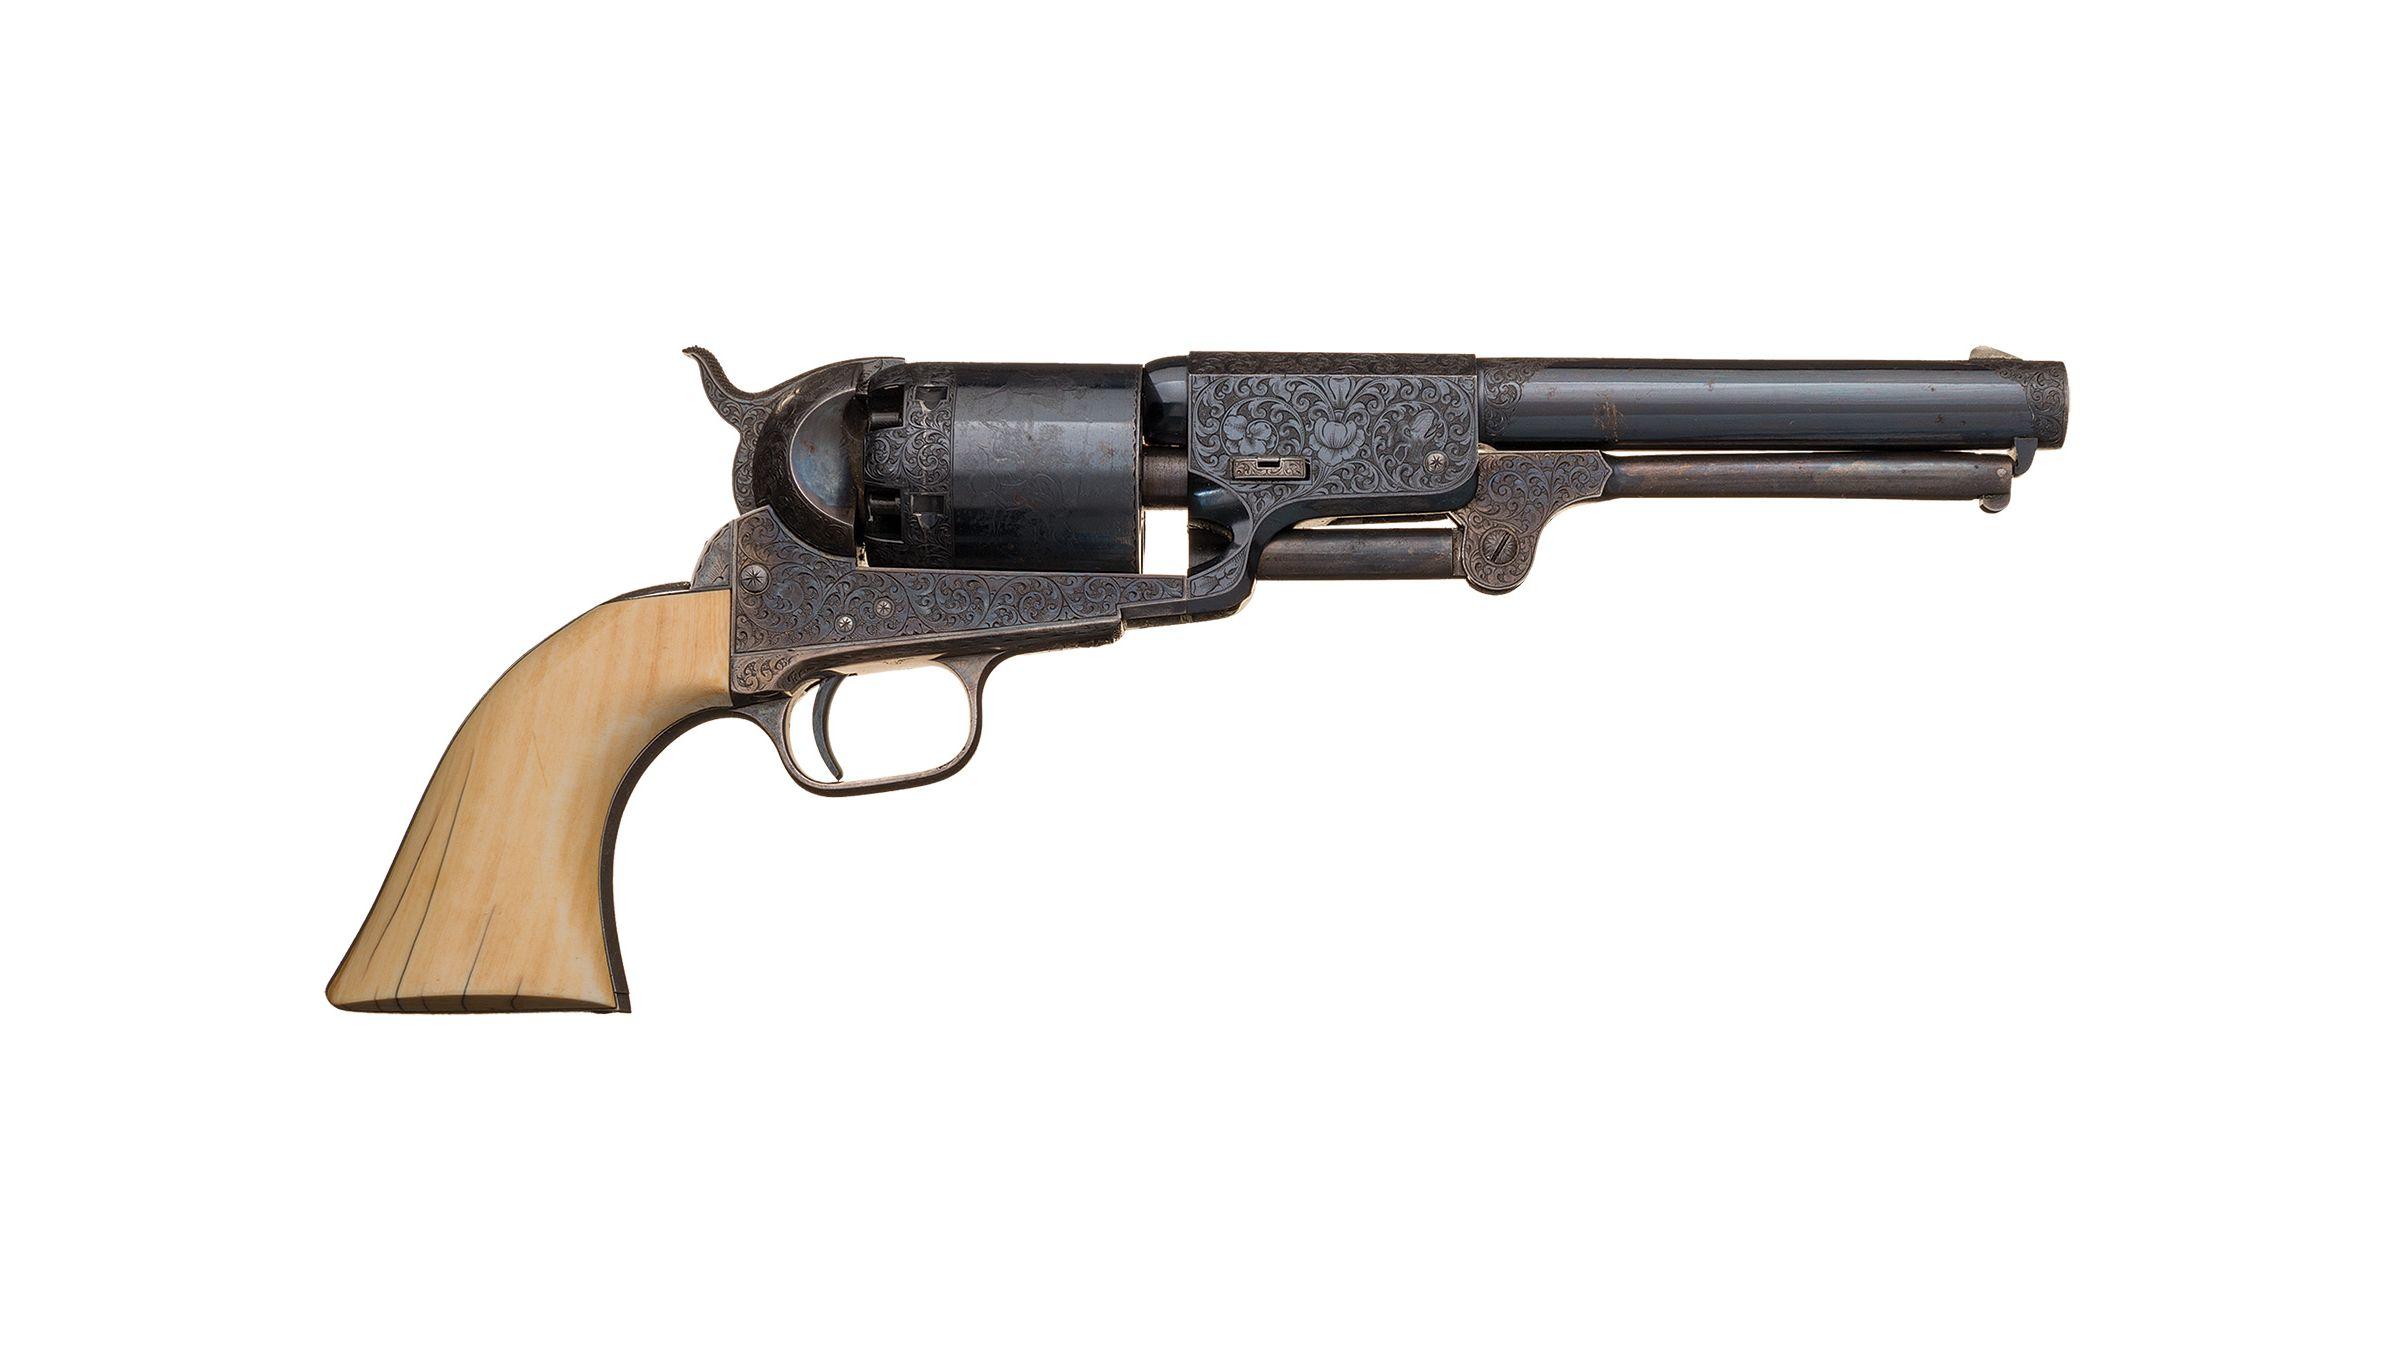 G. Young Engraved Colt Millikin Dragoon Revolver